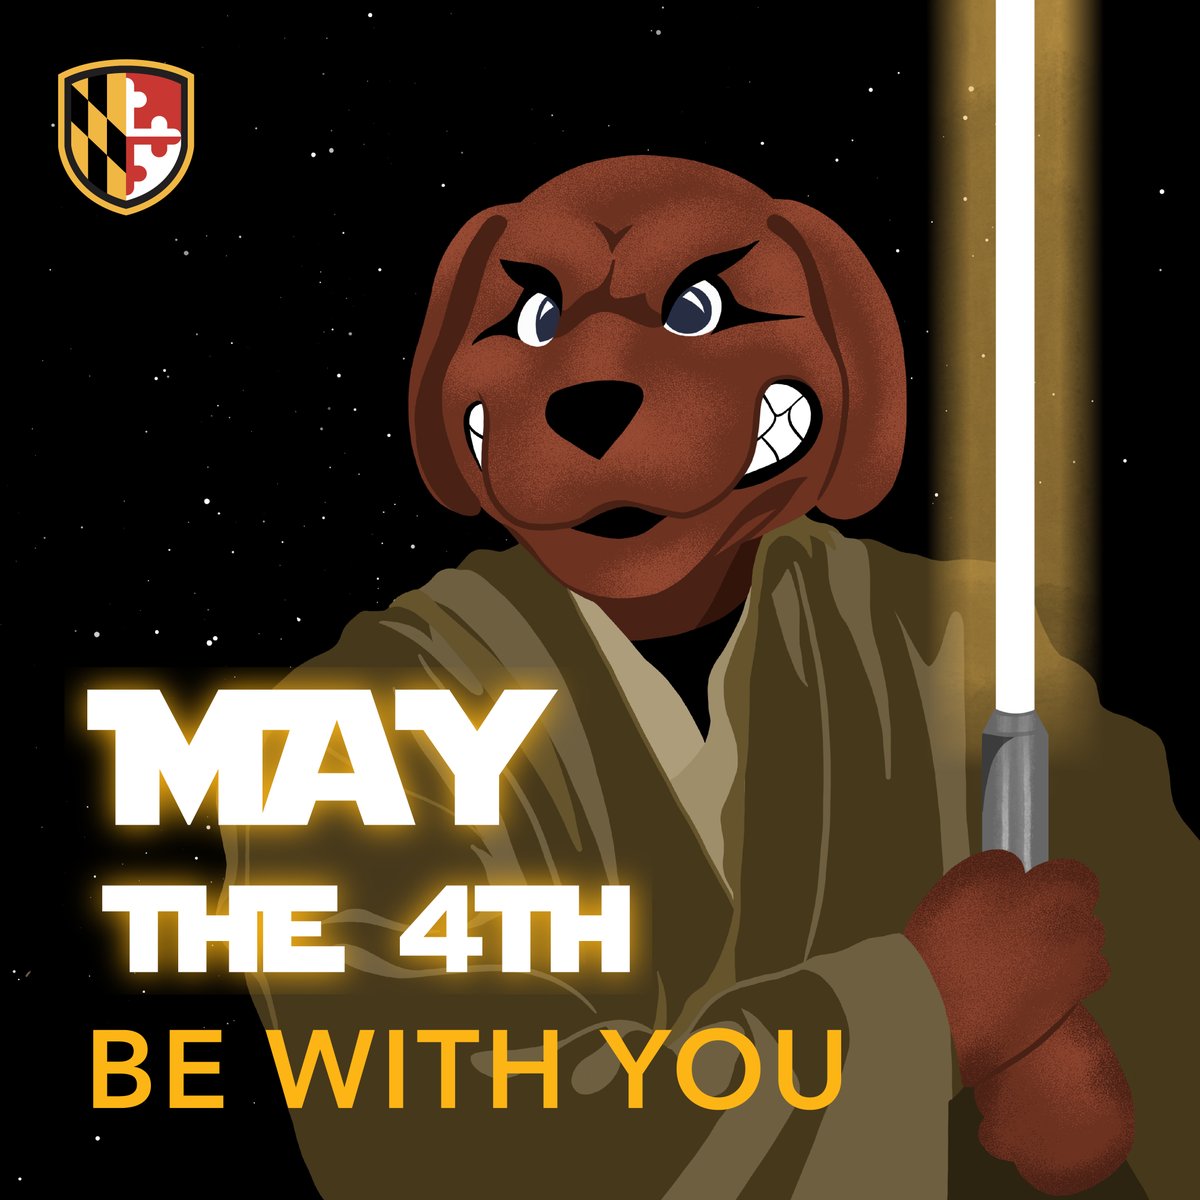 You know we had to. #MayThe4th be with you, Retrievers!